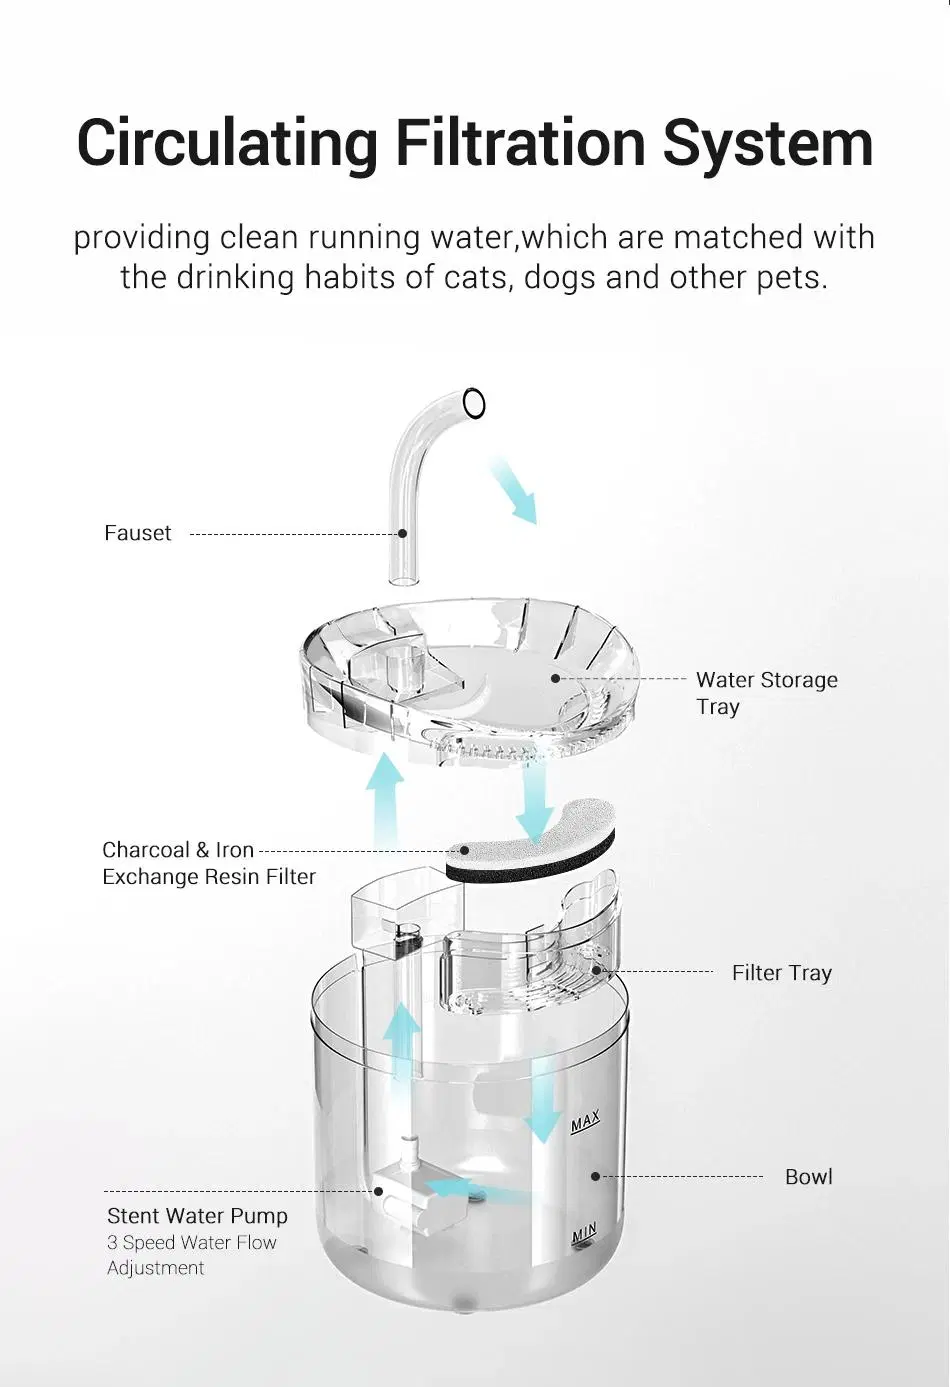 Simulate Spring Water Dual Frequency 5000mAh Rechargeable Electric Smart Cat Pet Water Dispenser